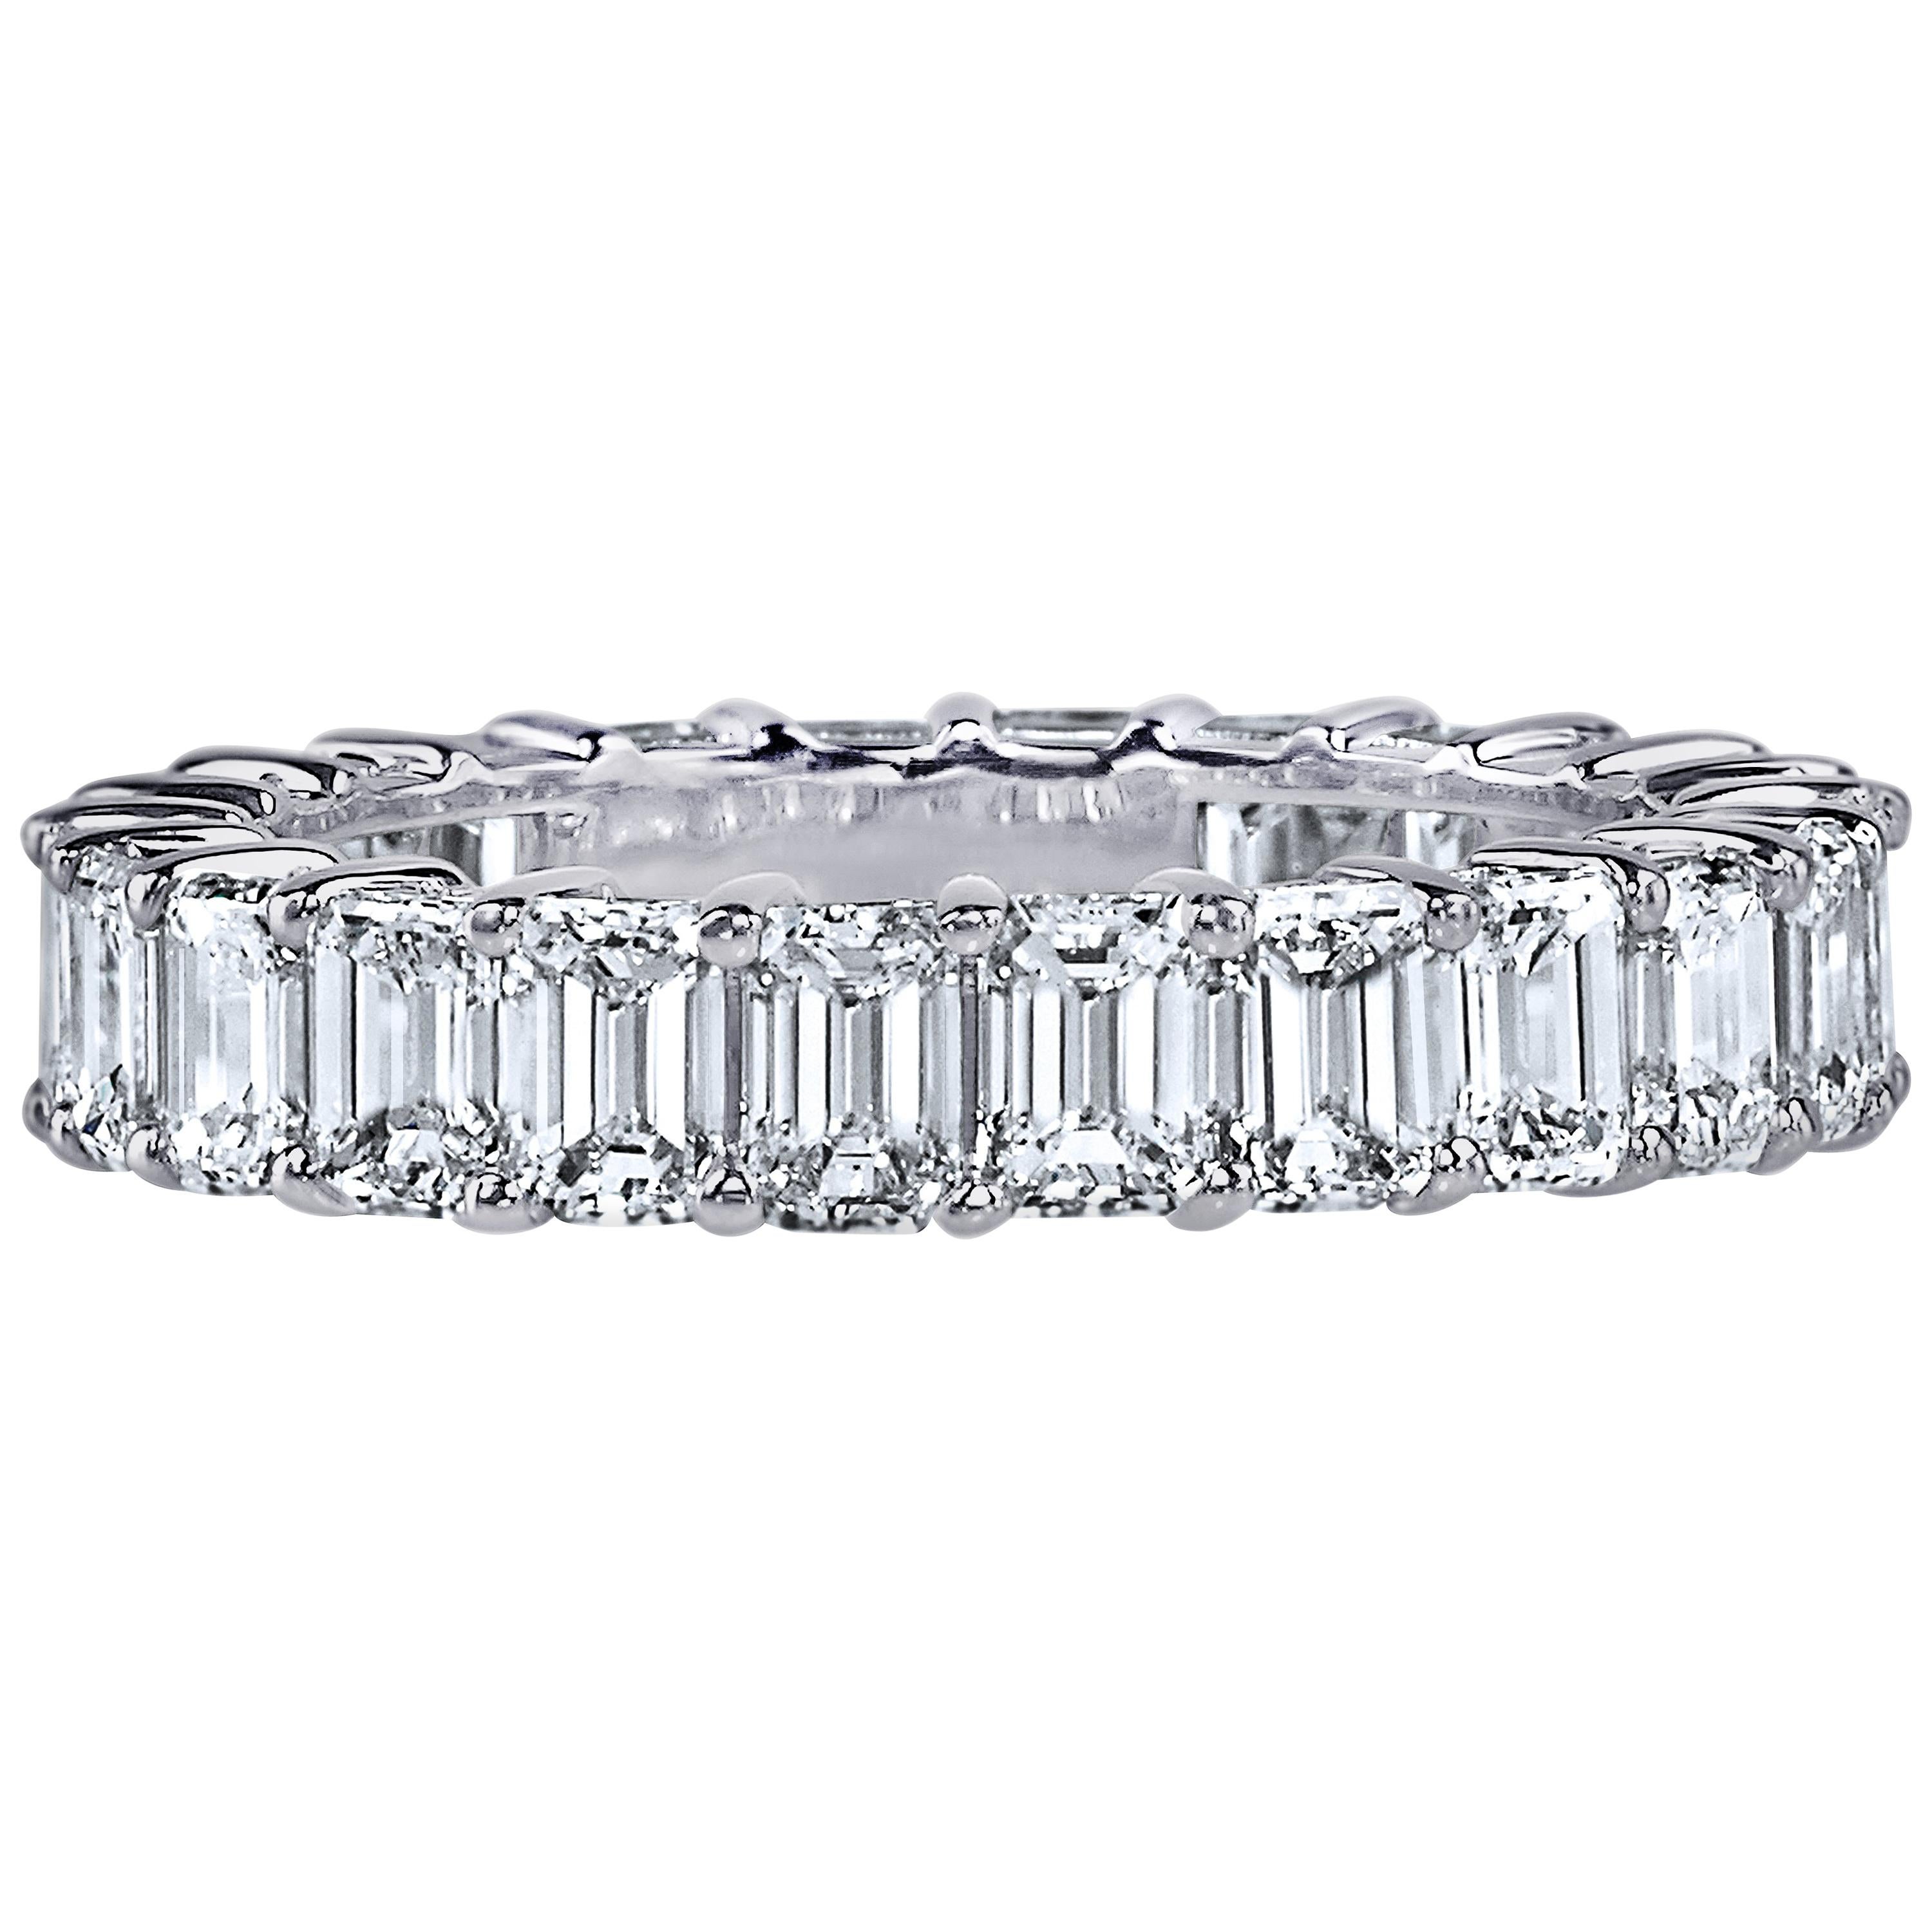 GIA Certified 6.00 Carat Emerald Cut Diamond Ring Platinum Eternity Band For Sale